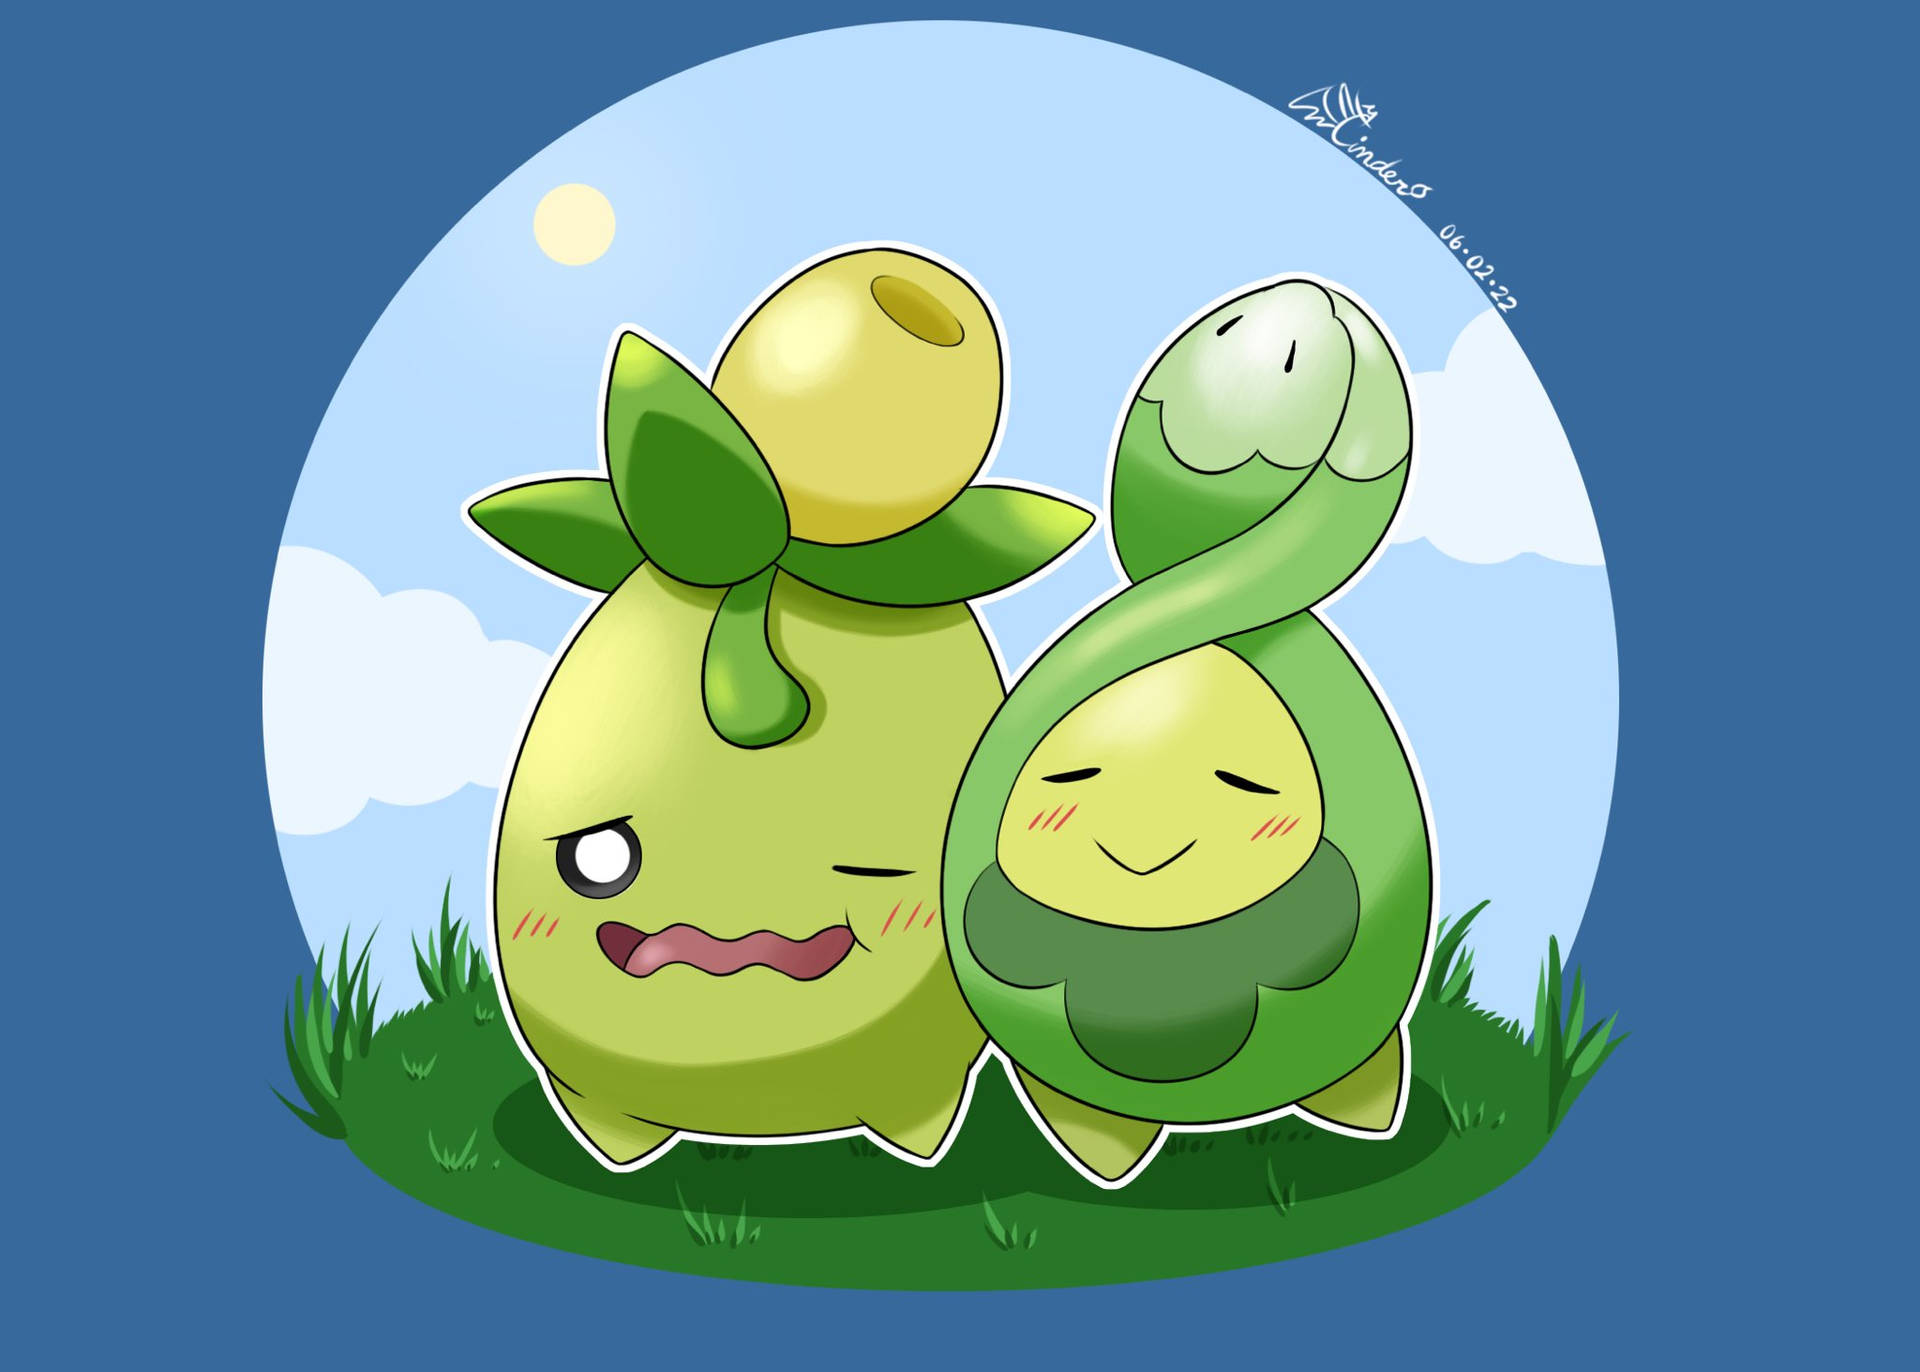 Budew And Smoliv On Grass Field Wallpaper